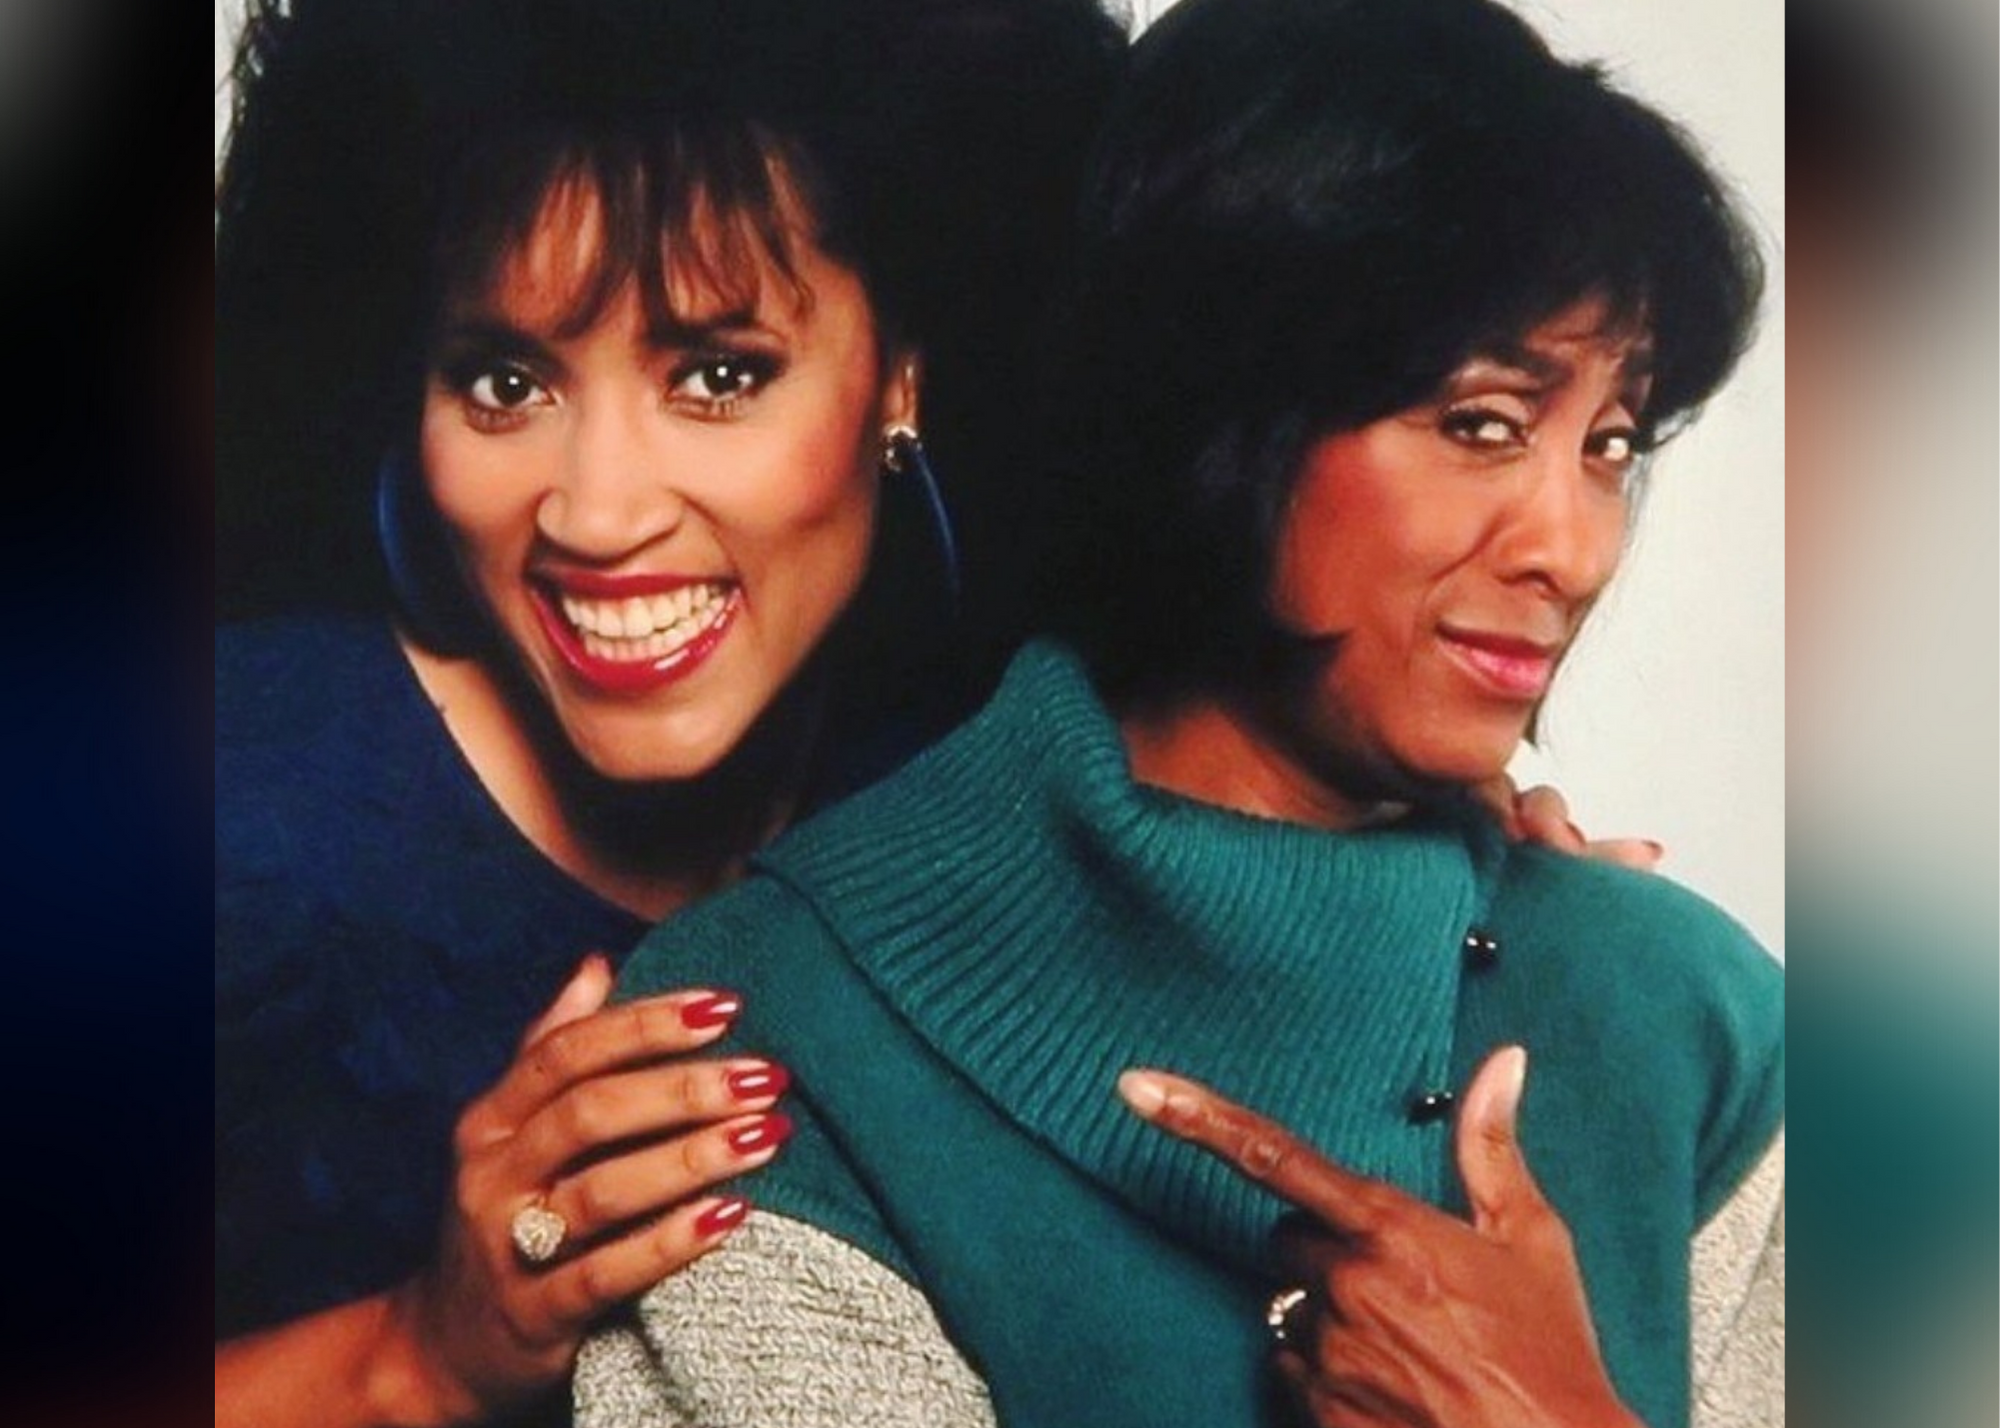 Marla Gibbs to Reunite with “227” Co-Star Jackée Harry on “Days of Our Lives”